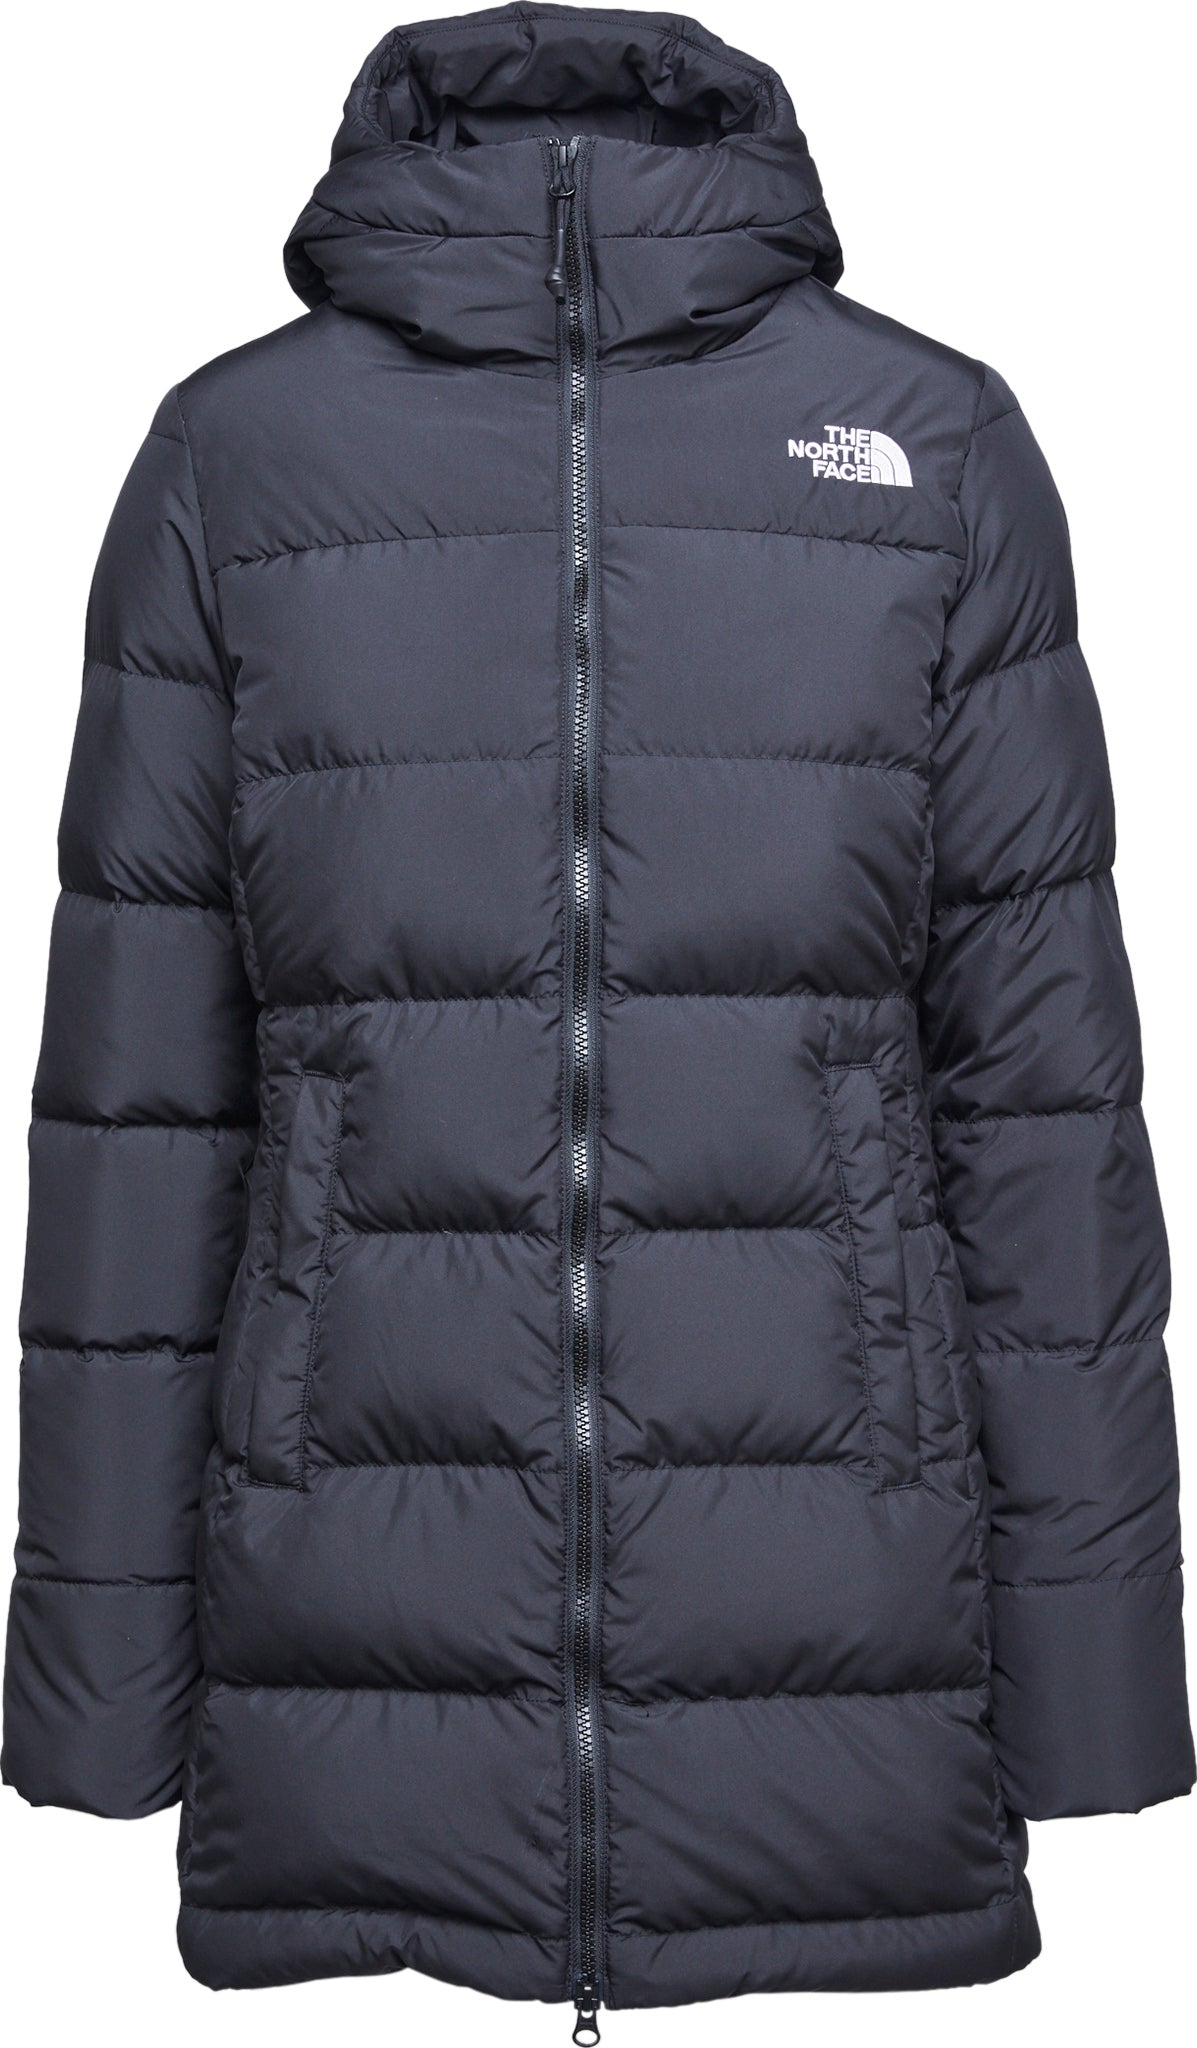 The North Face Gotham Parka - Women's | Altitude Sports